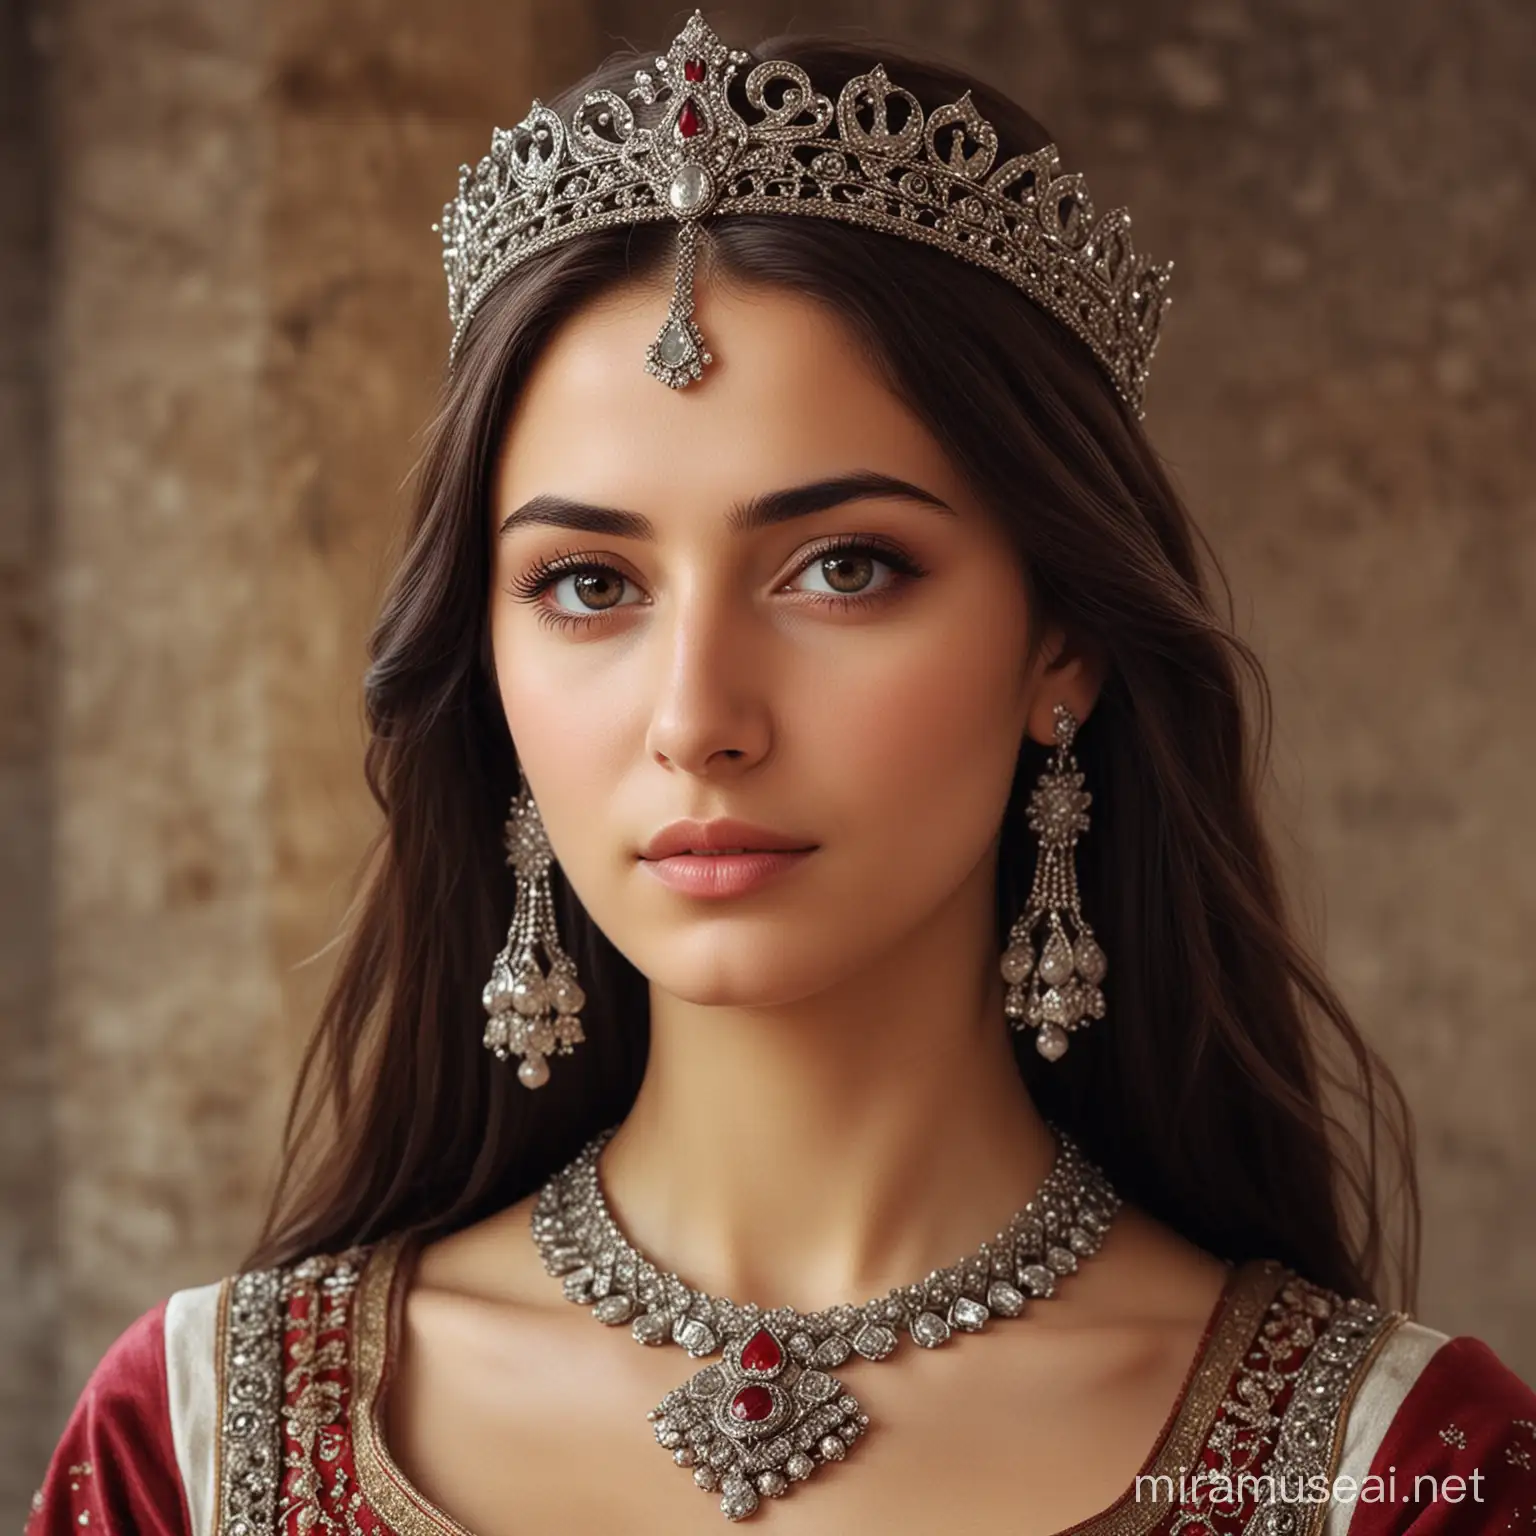 Beautiful 12th Century Georgian Princess Lost in Thoughts of Her Boyfriend